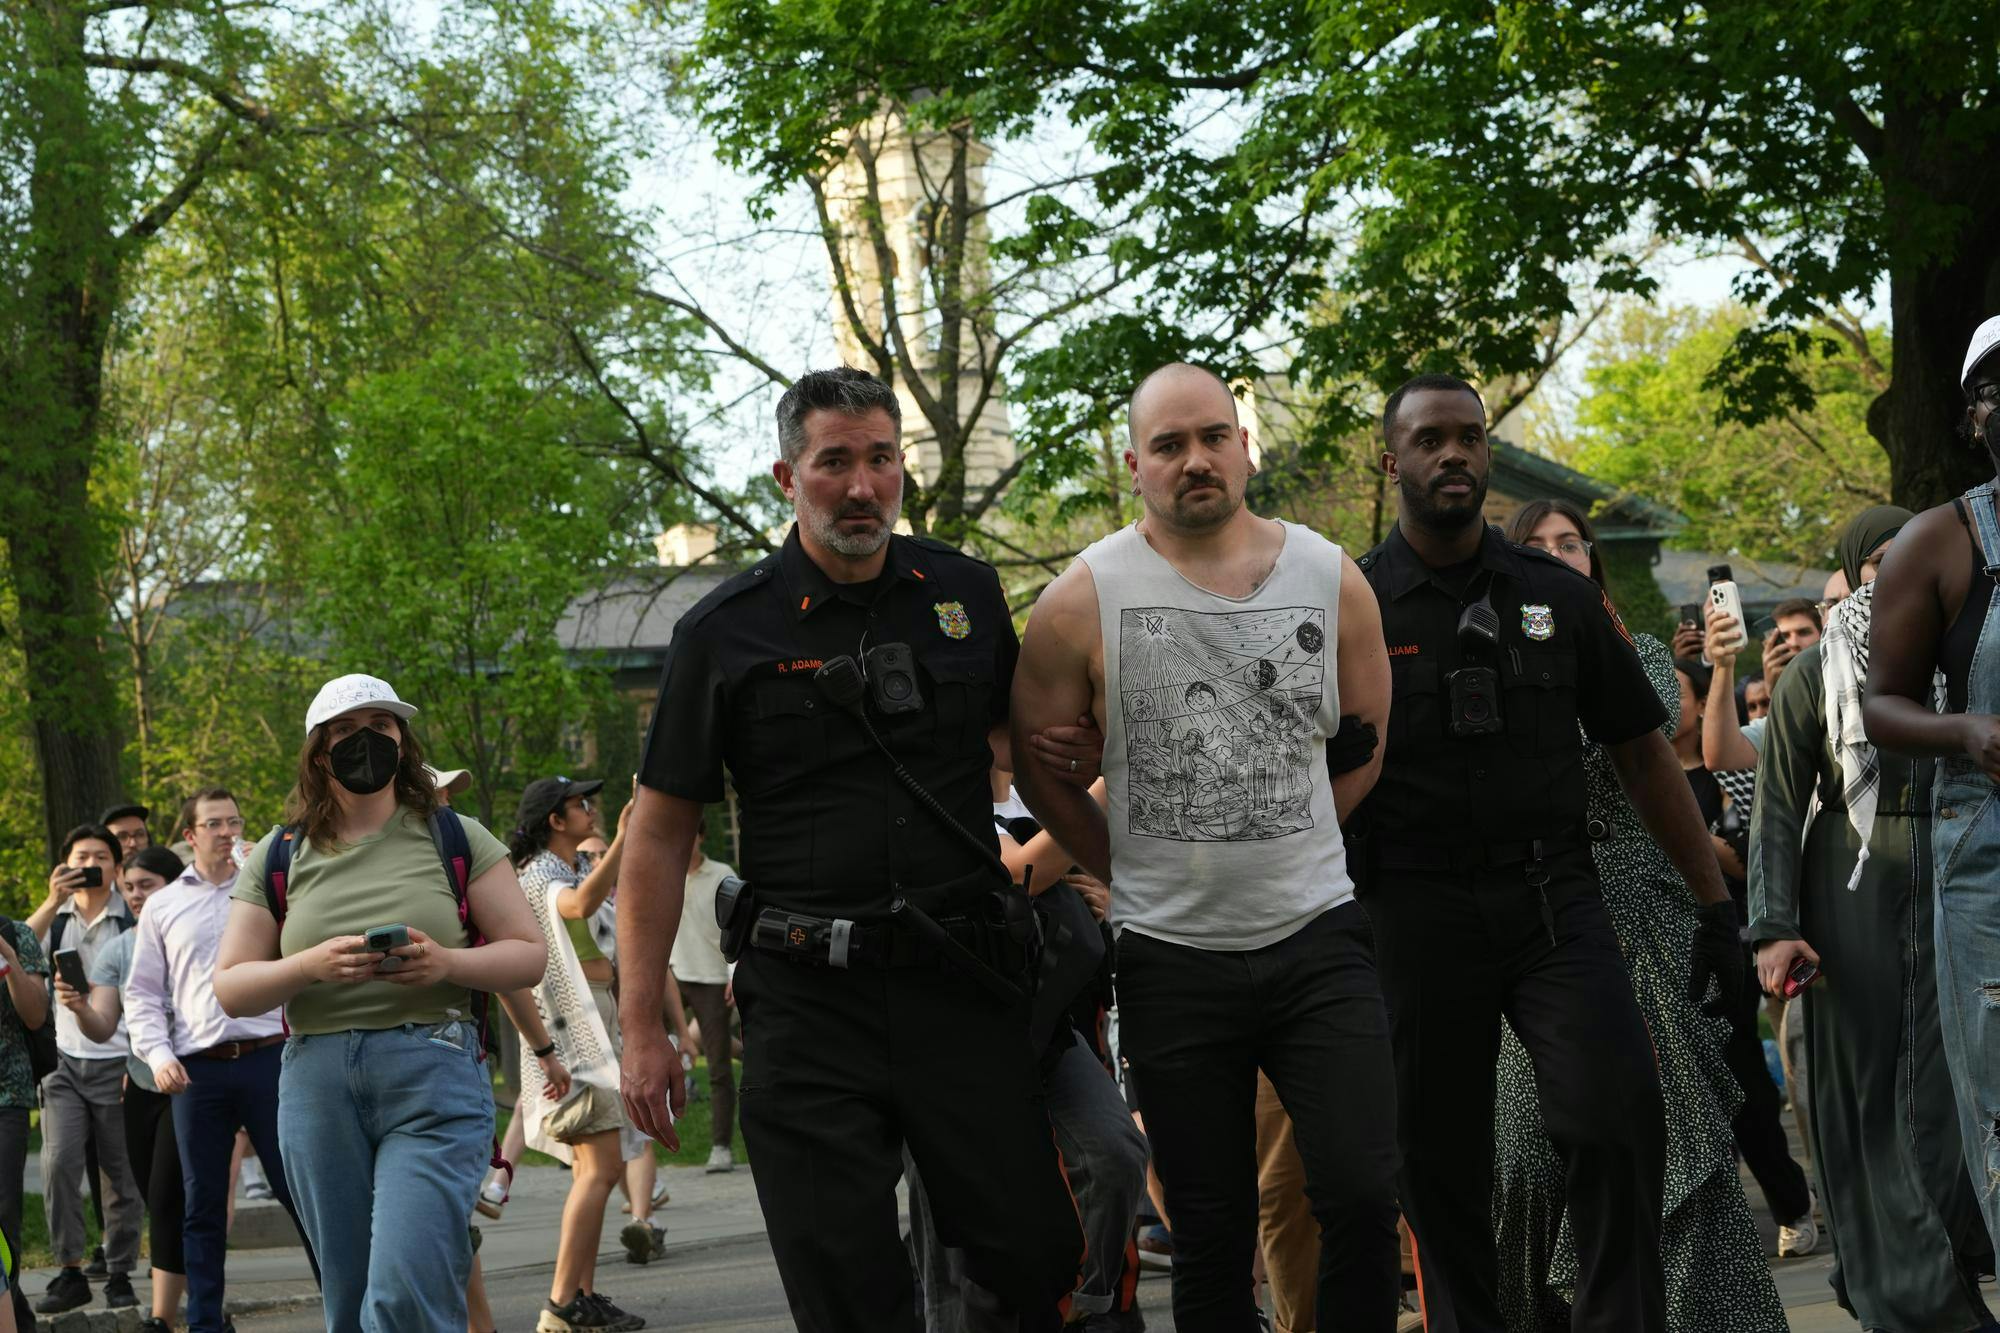 A man in a white graphic muscle tee walks with his hands behind his back while two police officers grab each of his arms in black and orange uniforms. Many people stand around them.